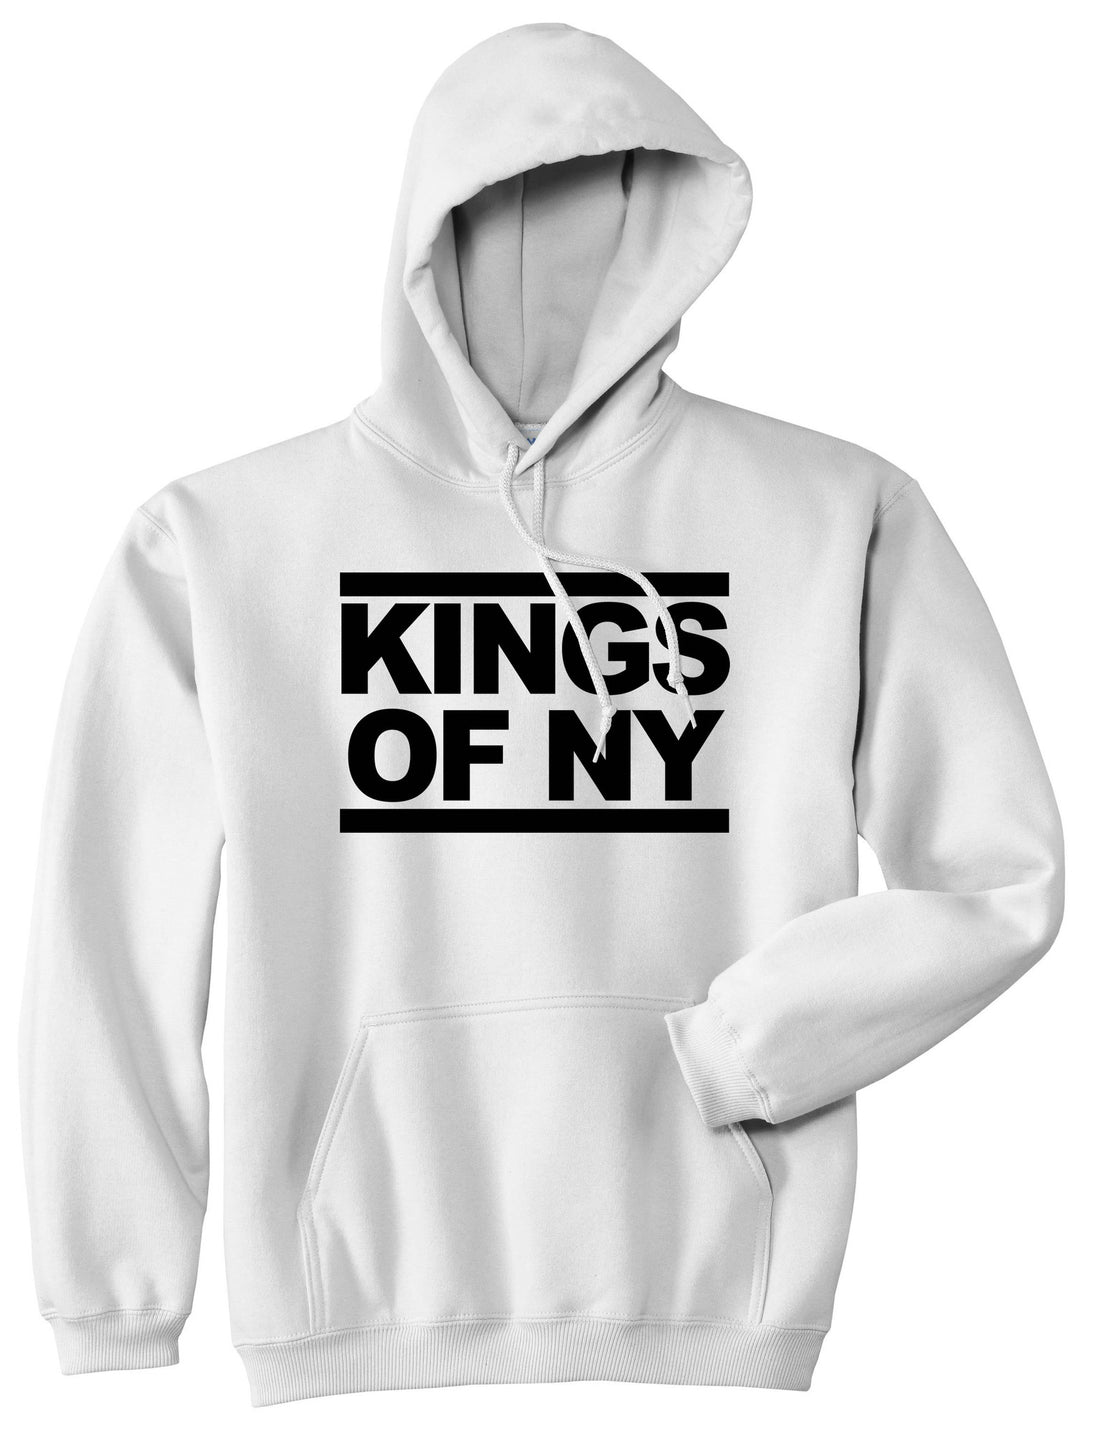 Kings Of NY Run DMC Logo Style Pullover Hoodie in White By Kings Of NY